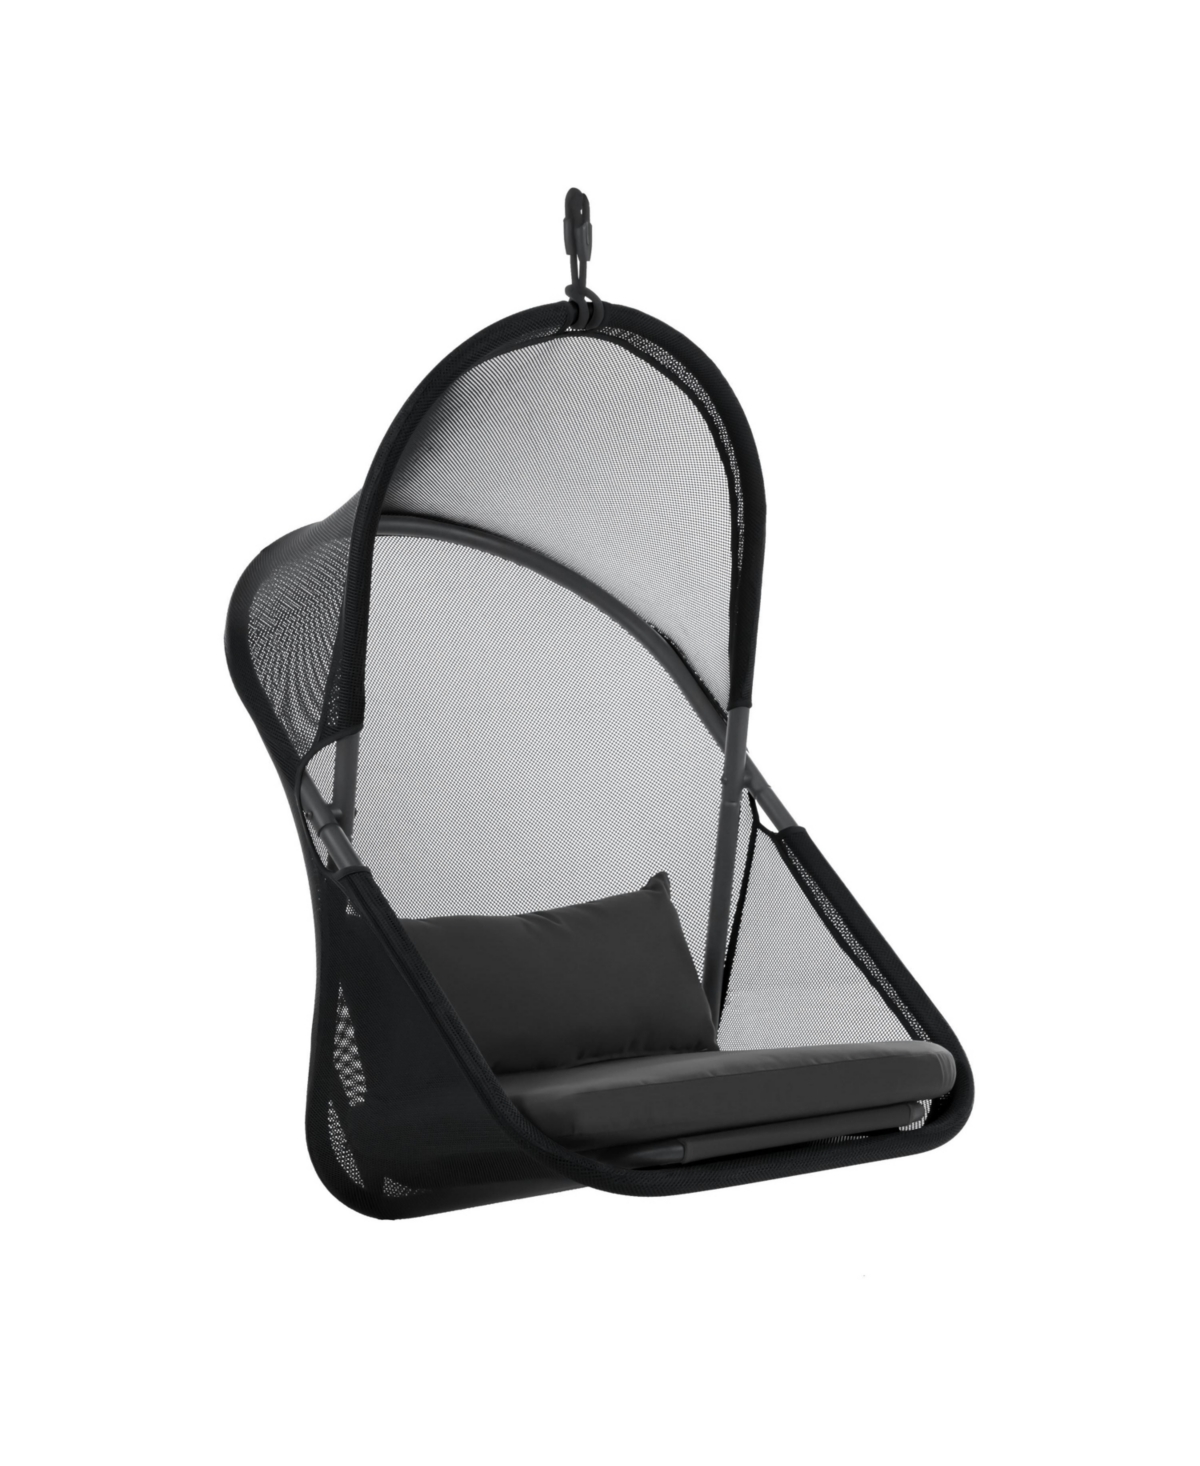 Furniture Of America 43.25" Mesh Foldable Swing Chair With Canopy Low Back Cushion No Stand In Black